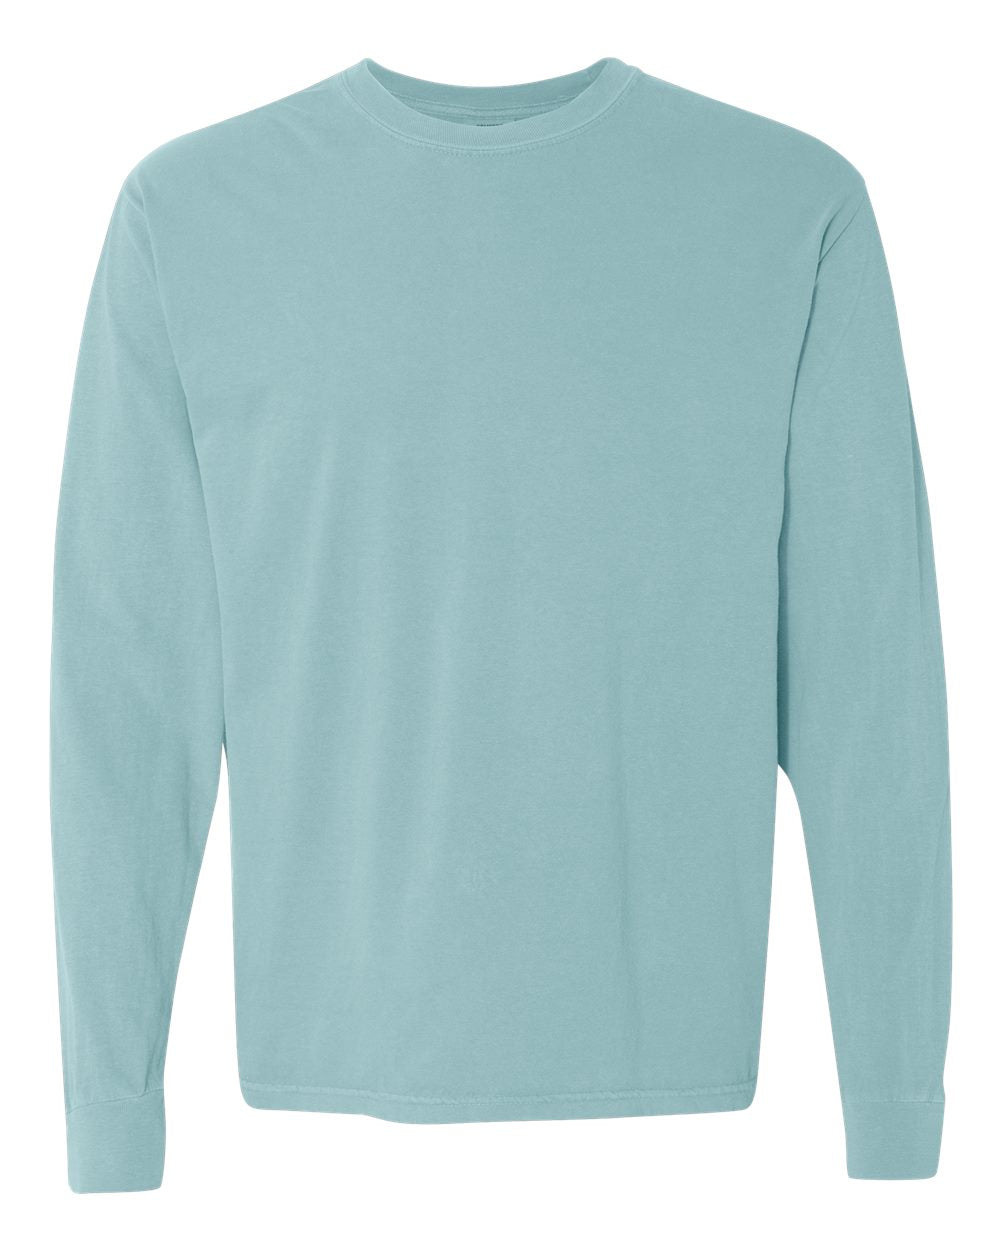 Comfort Colors Garment-Dyed Heavyweight Long Sleeve T-Shirt 6014 #color_Chalky Mint